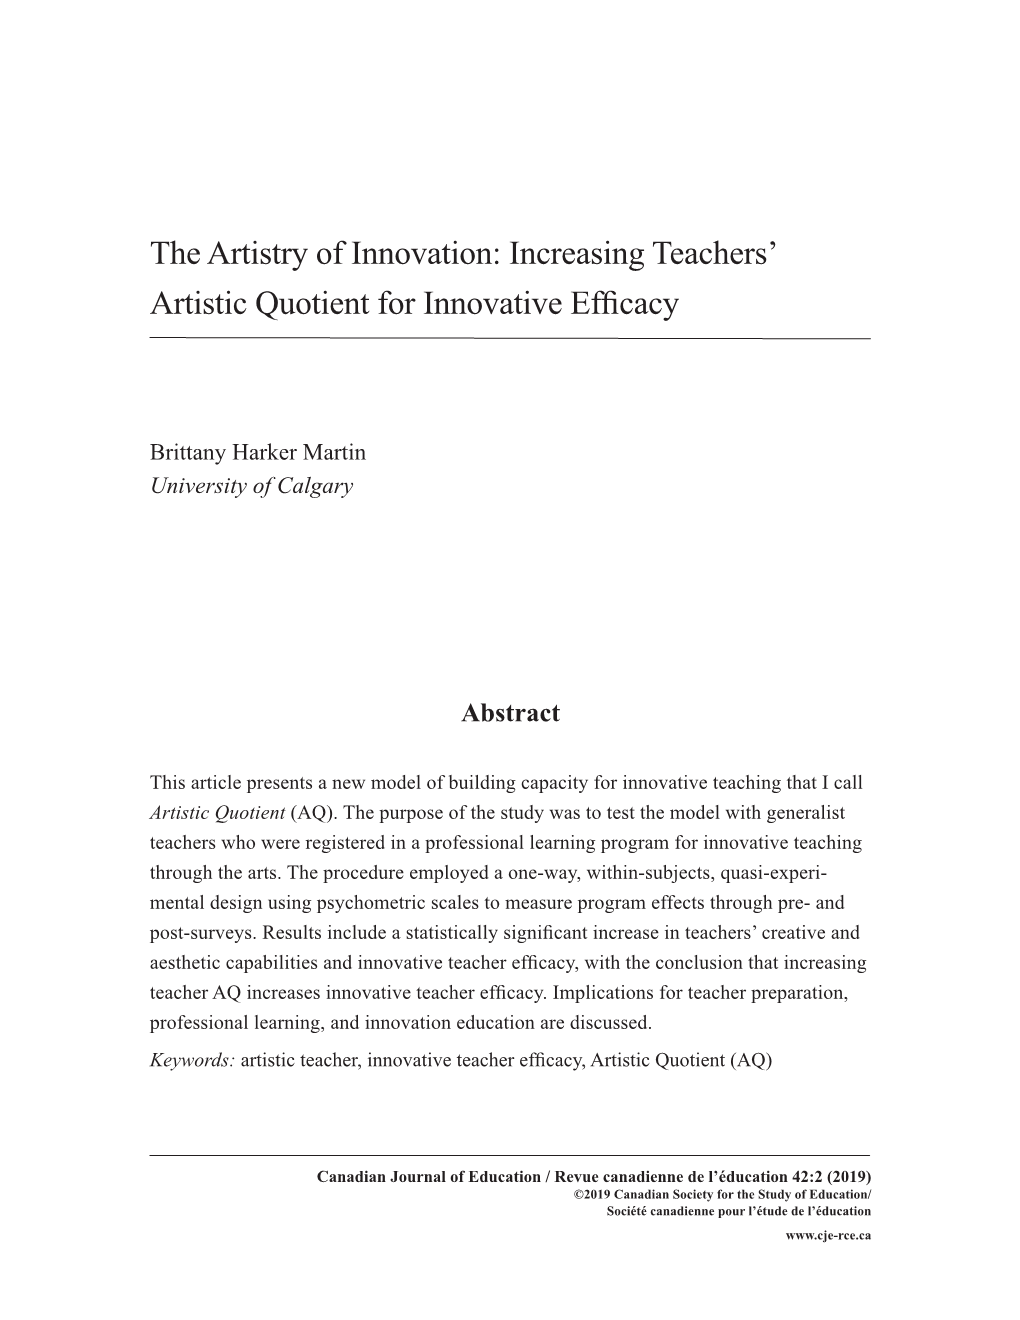 Increasing Teachers' Artistic Quotient for Innovative Efficacy